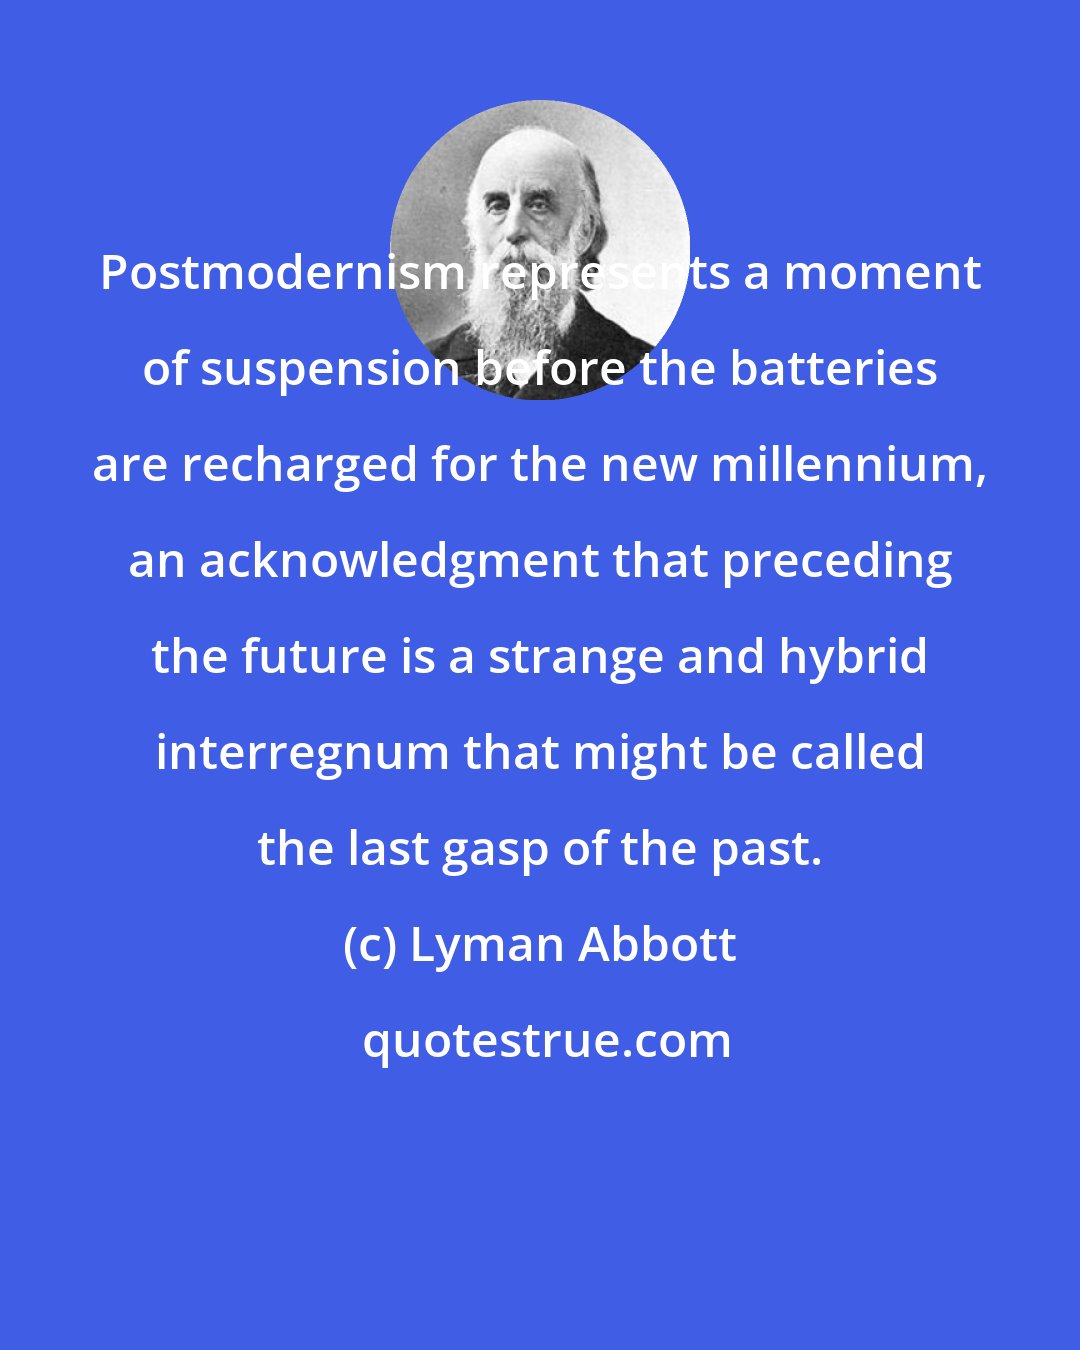 Lyman Abbott: Postmodernism represents a moment of suspension before the batteries are recharged for the new millennium, an acknowledgment that preceding the future is a strange and hybrid interregnum that might be called the last gasp of the past.